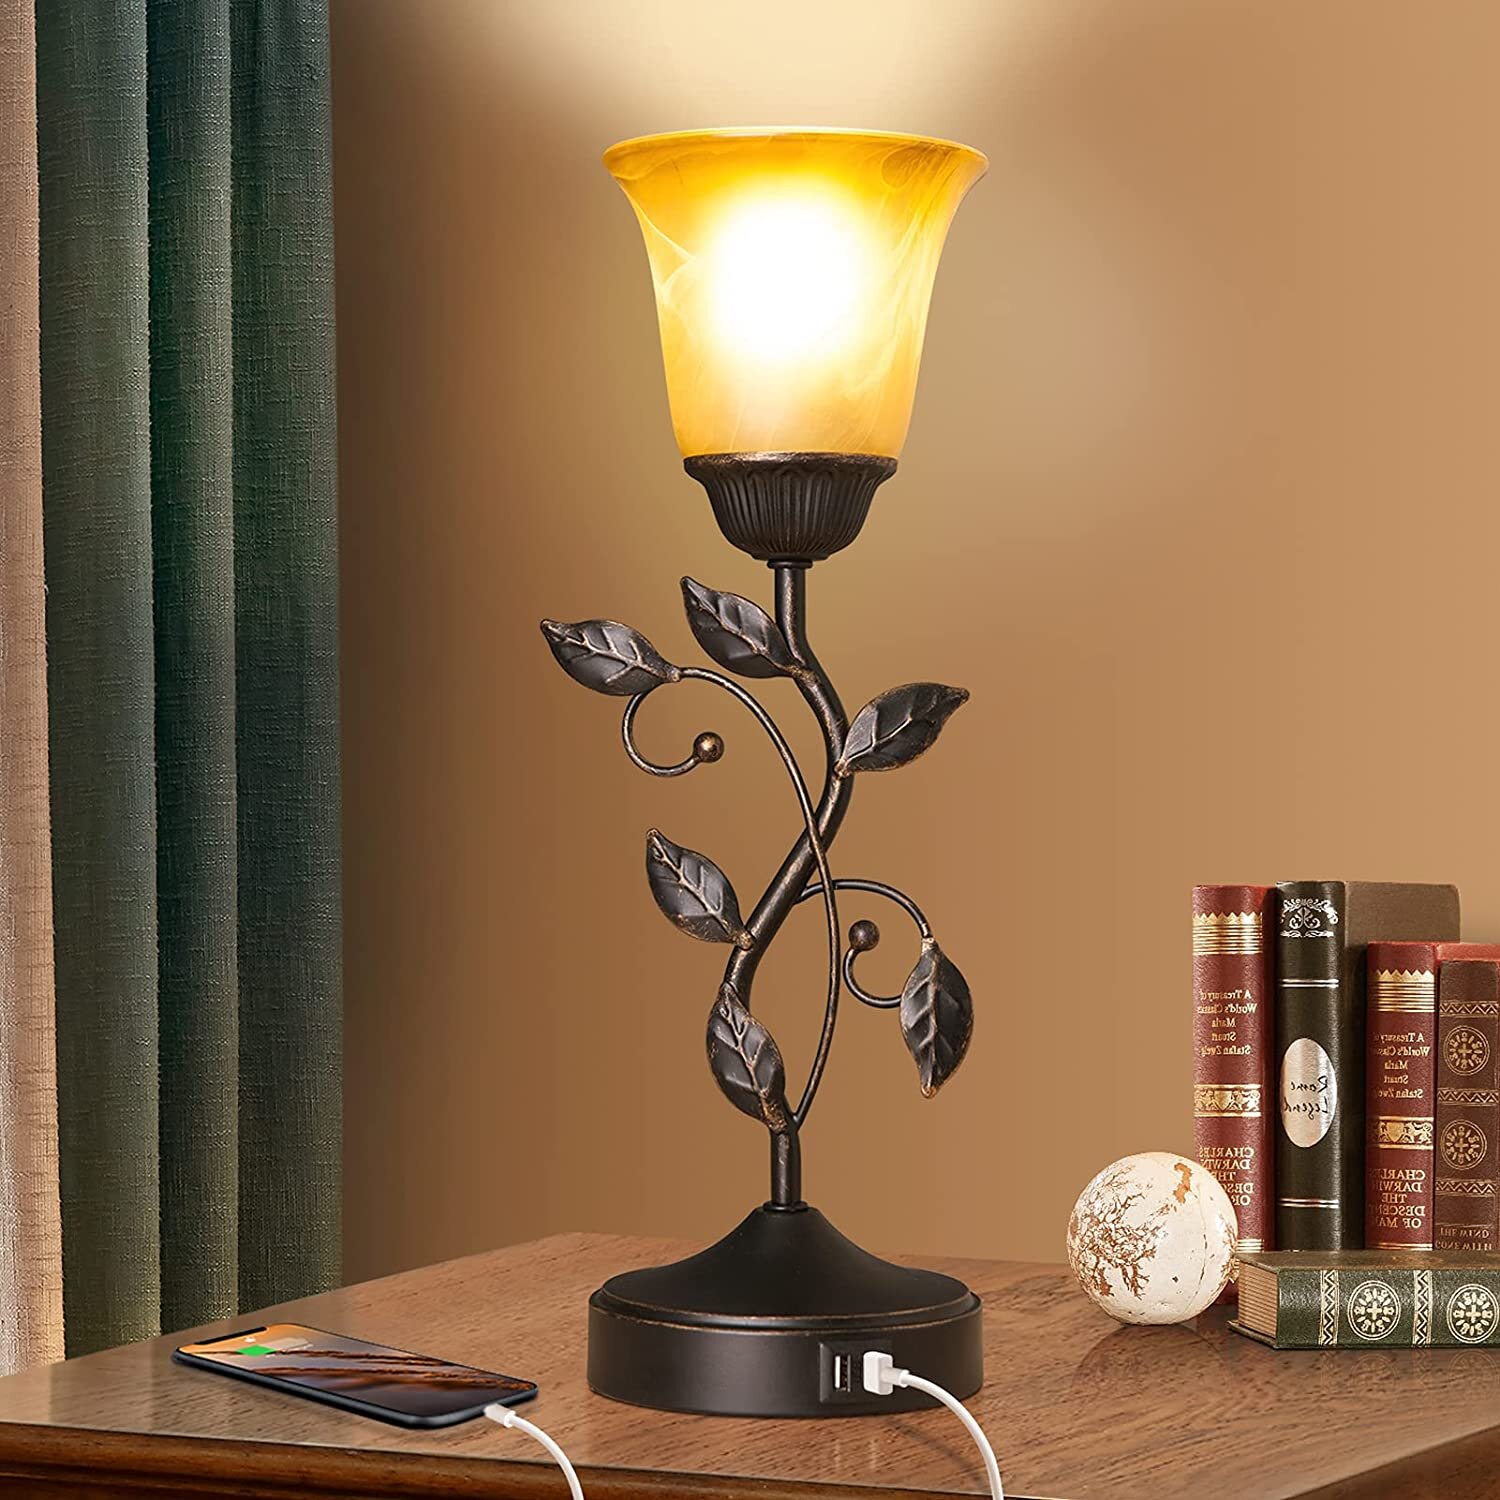 3-Way Dimmable Bedside Nightstand Lamps Bronze Touch Control Table Lamp with 2 USB Charging Ports Amber Glass Shade Vintage Rural Leaf Lamp for Living Room LED Bulb Included Bedroom Dresser 